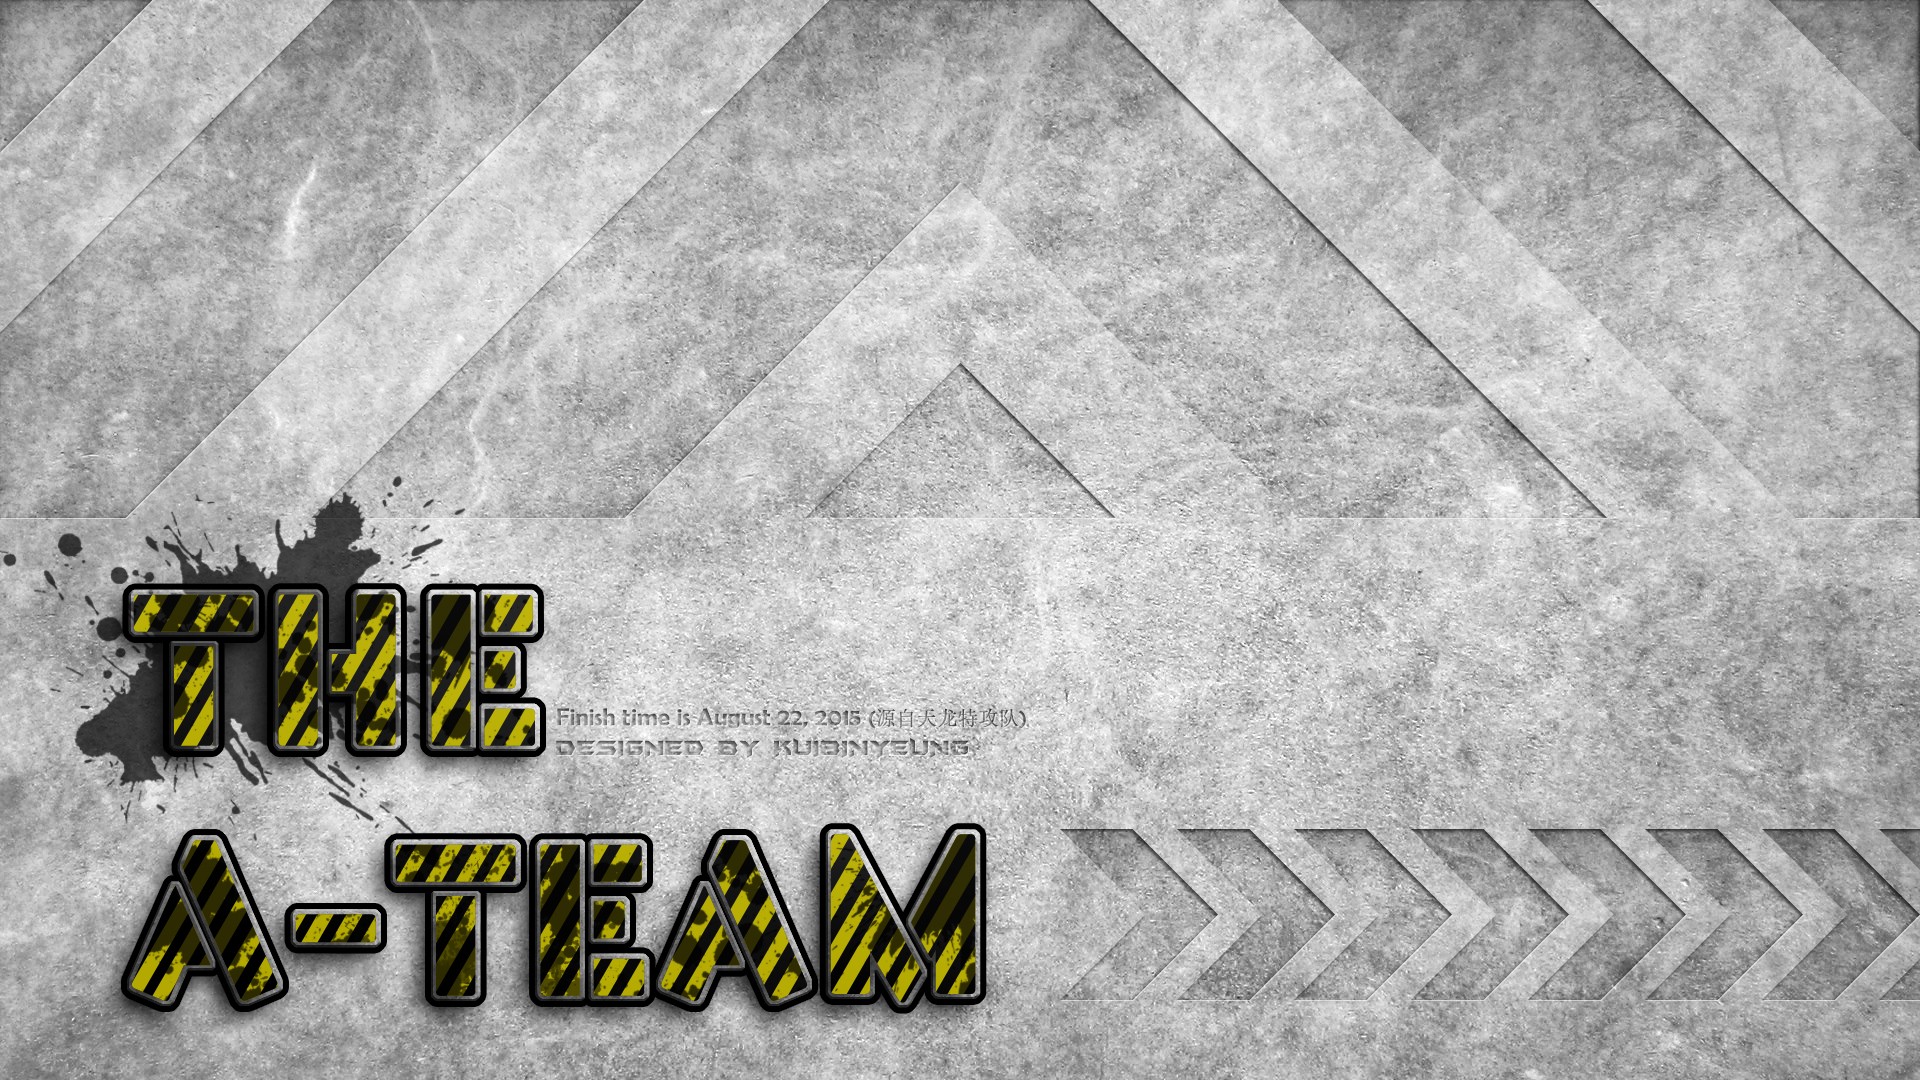 The A Team Photoshop Industrial 1920x1080